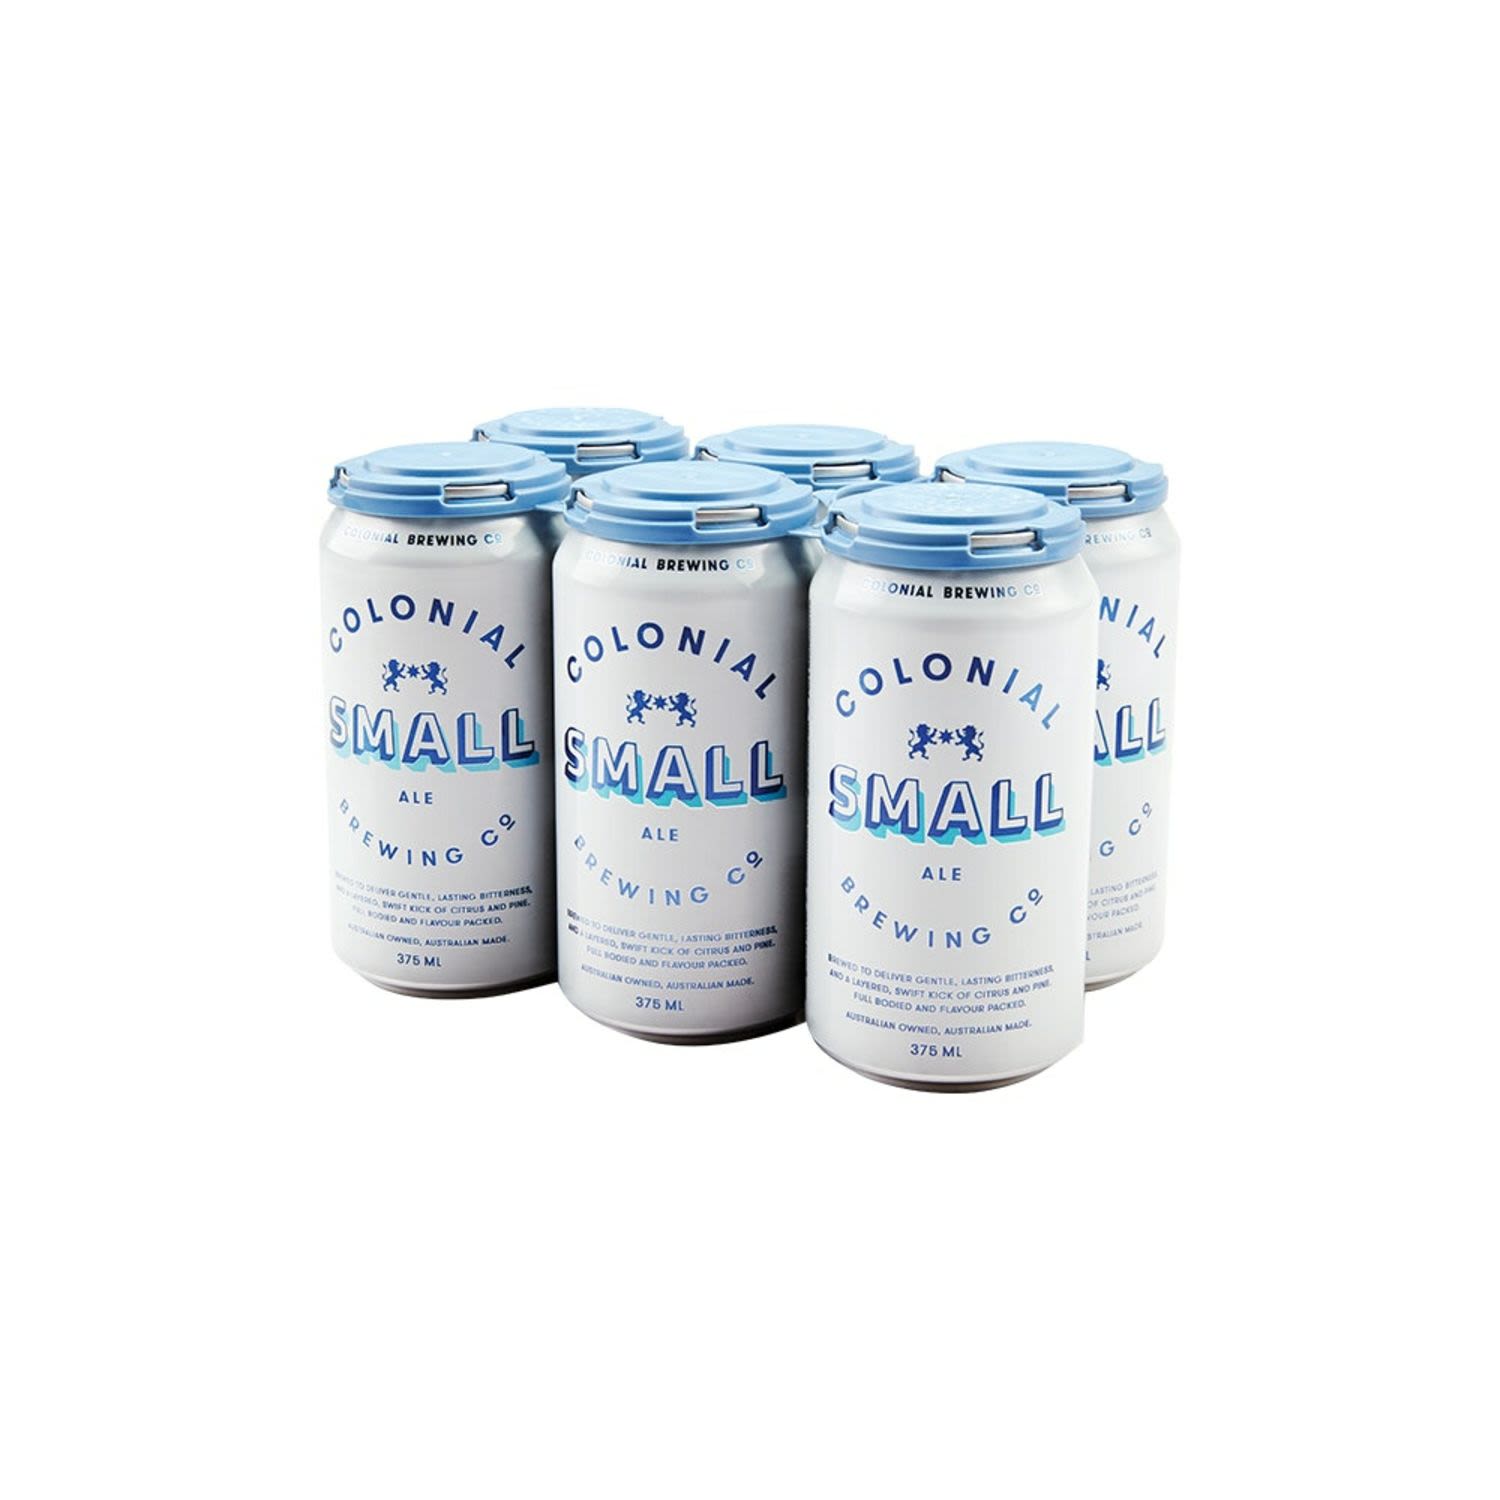 CBCo Small Ale Can 375mL 6 Pack